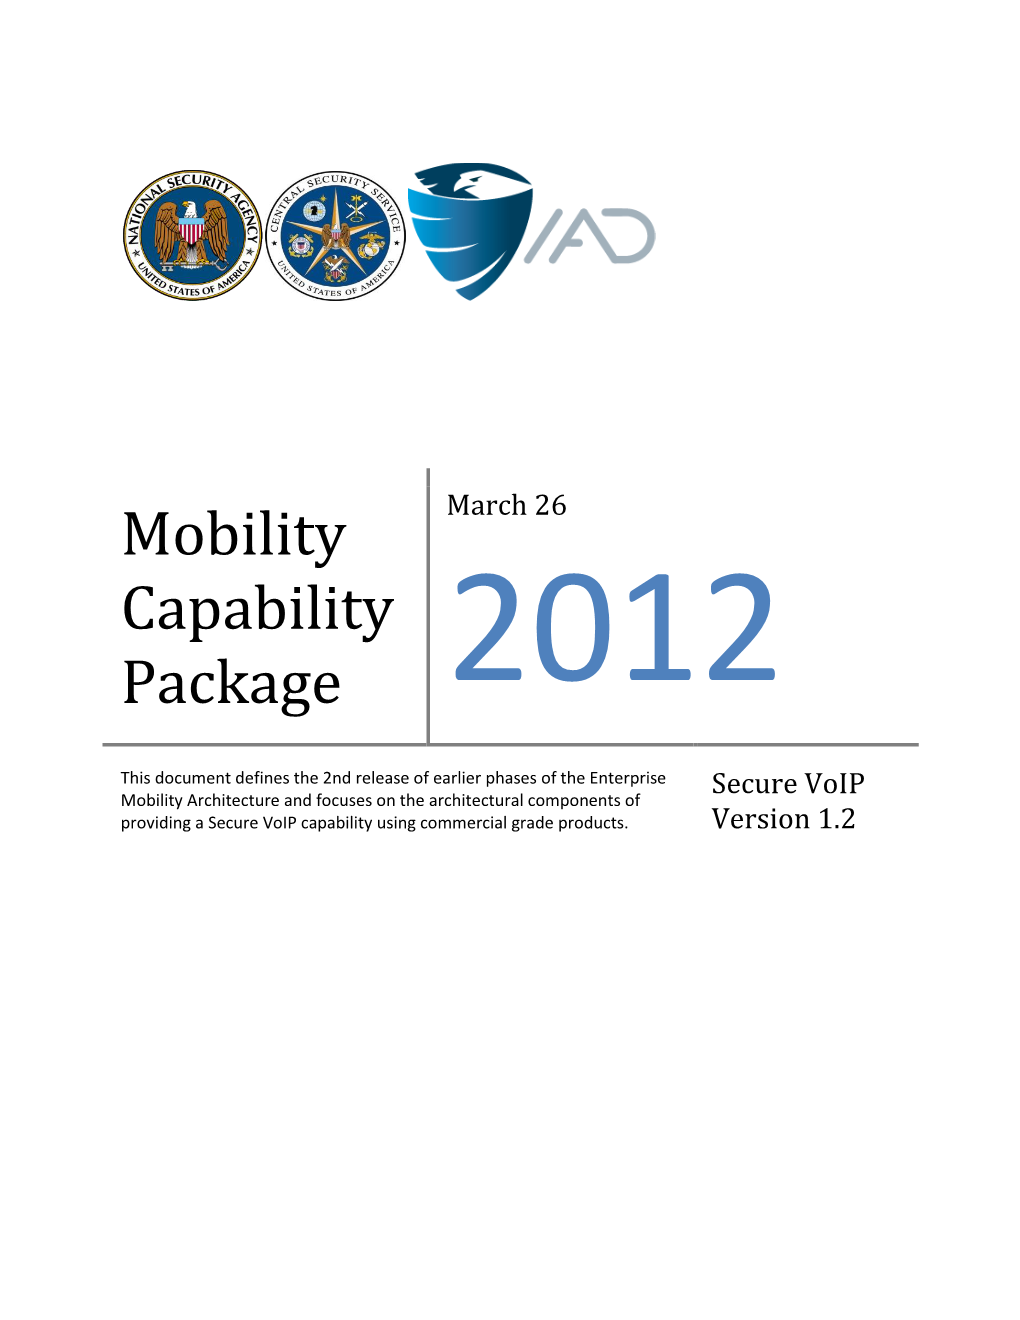 Mobility Capability Package